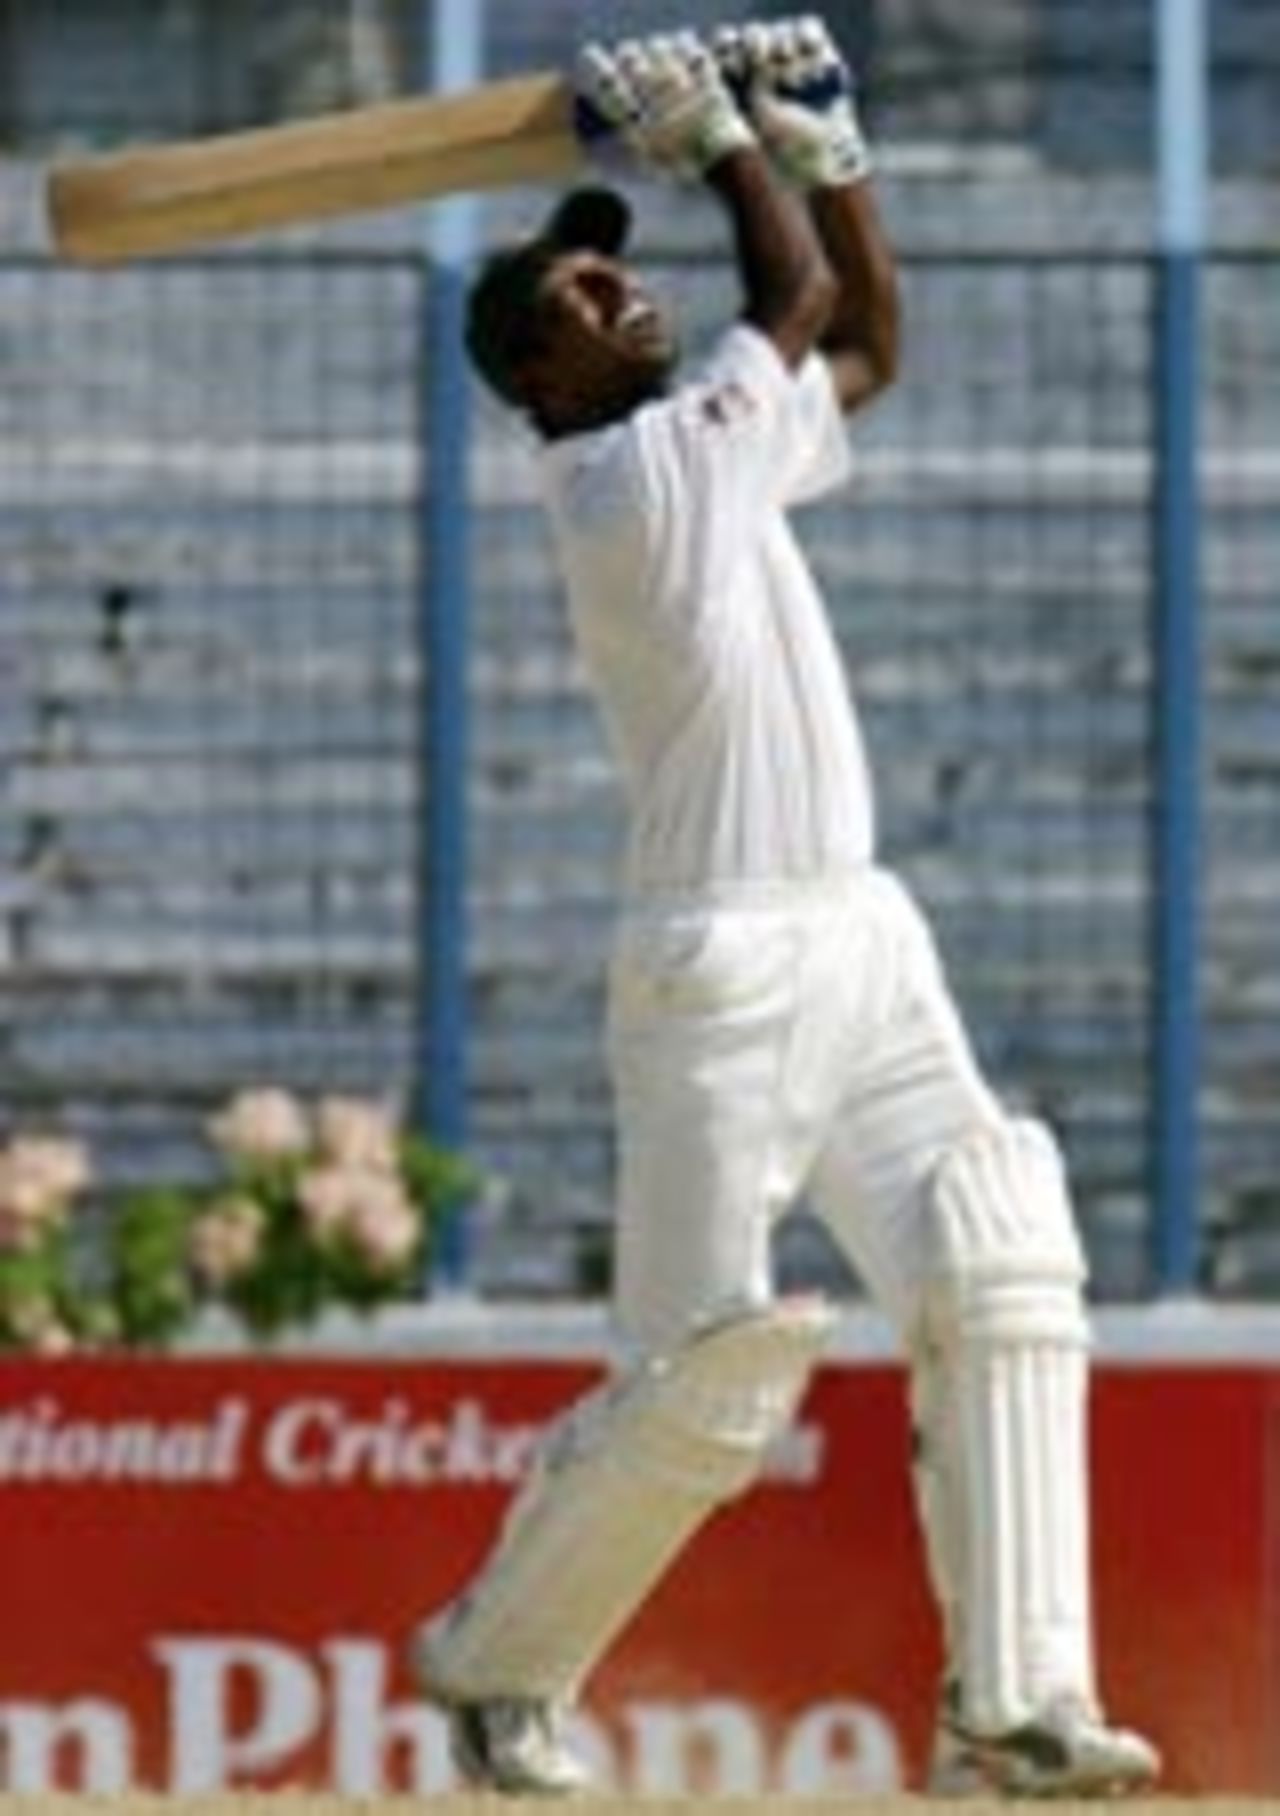 Tapash Baisya hits out on the way to 66, Bangladesh v New Zealand, 2nd Test, 4th day, Chittagong, October 29, 2004